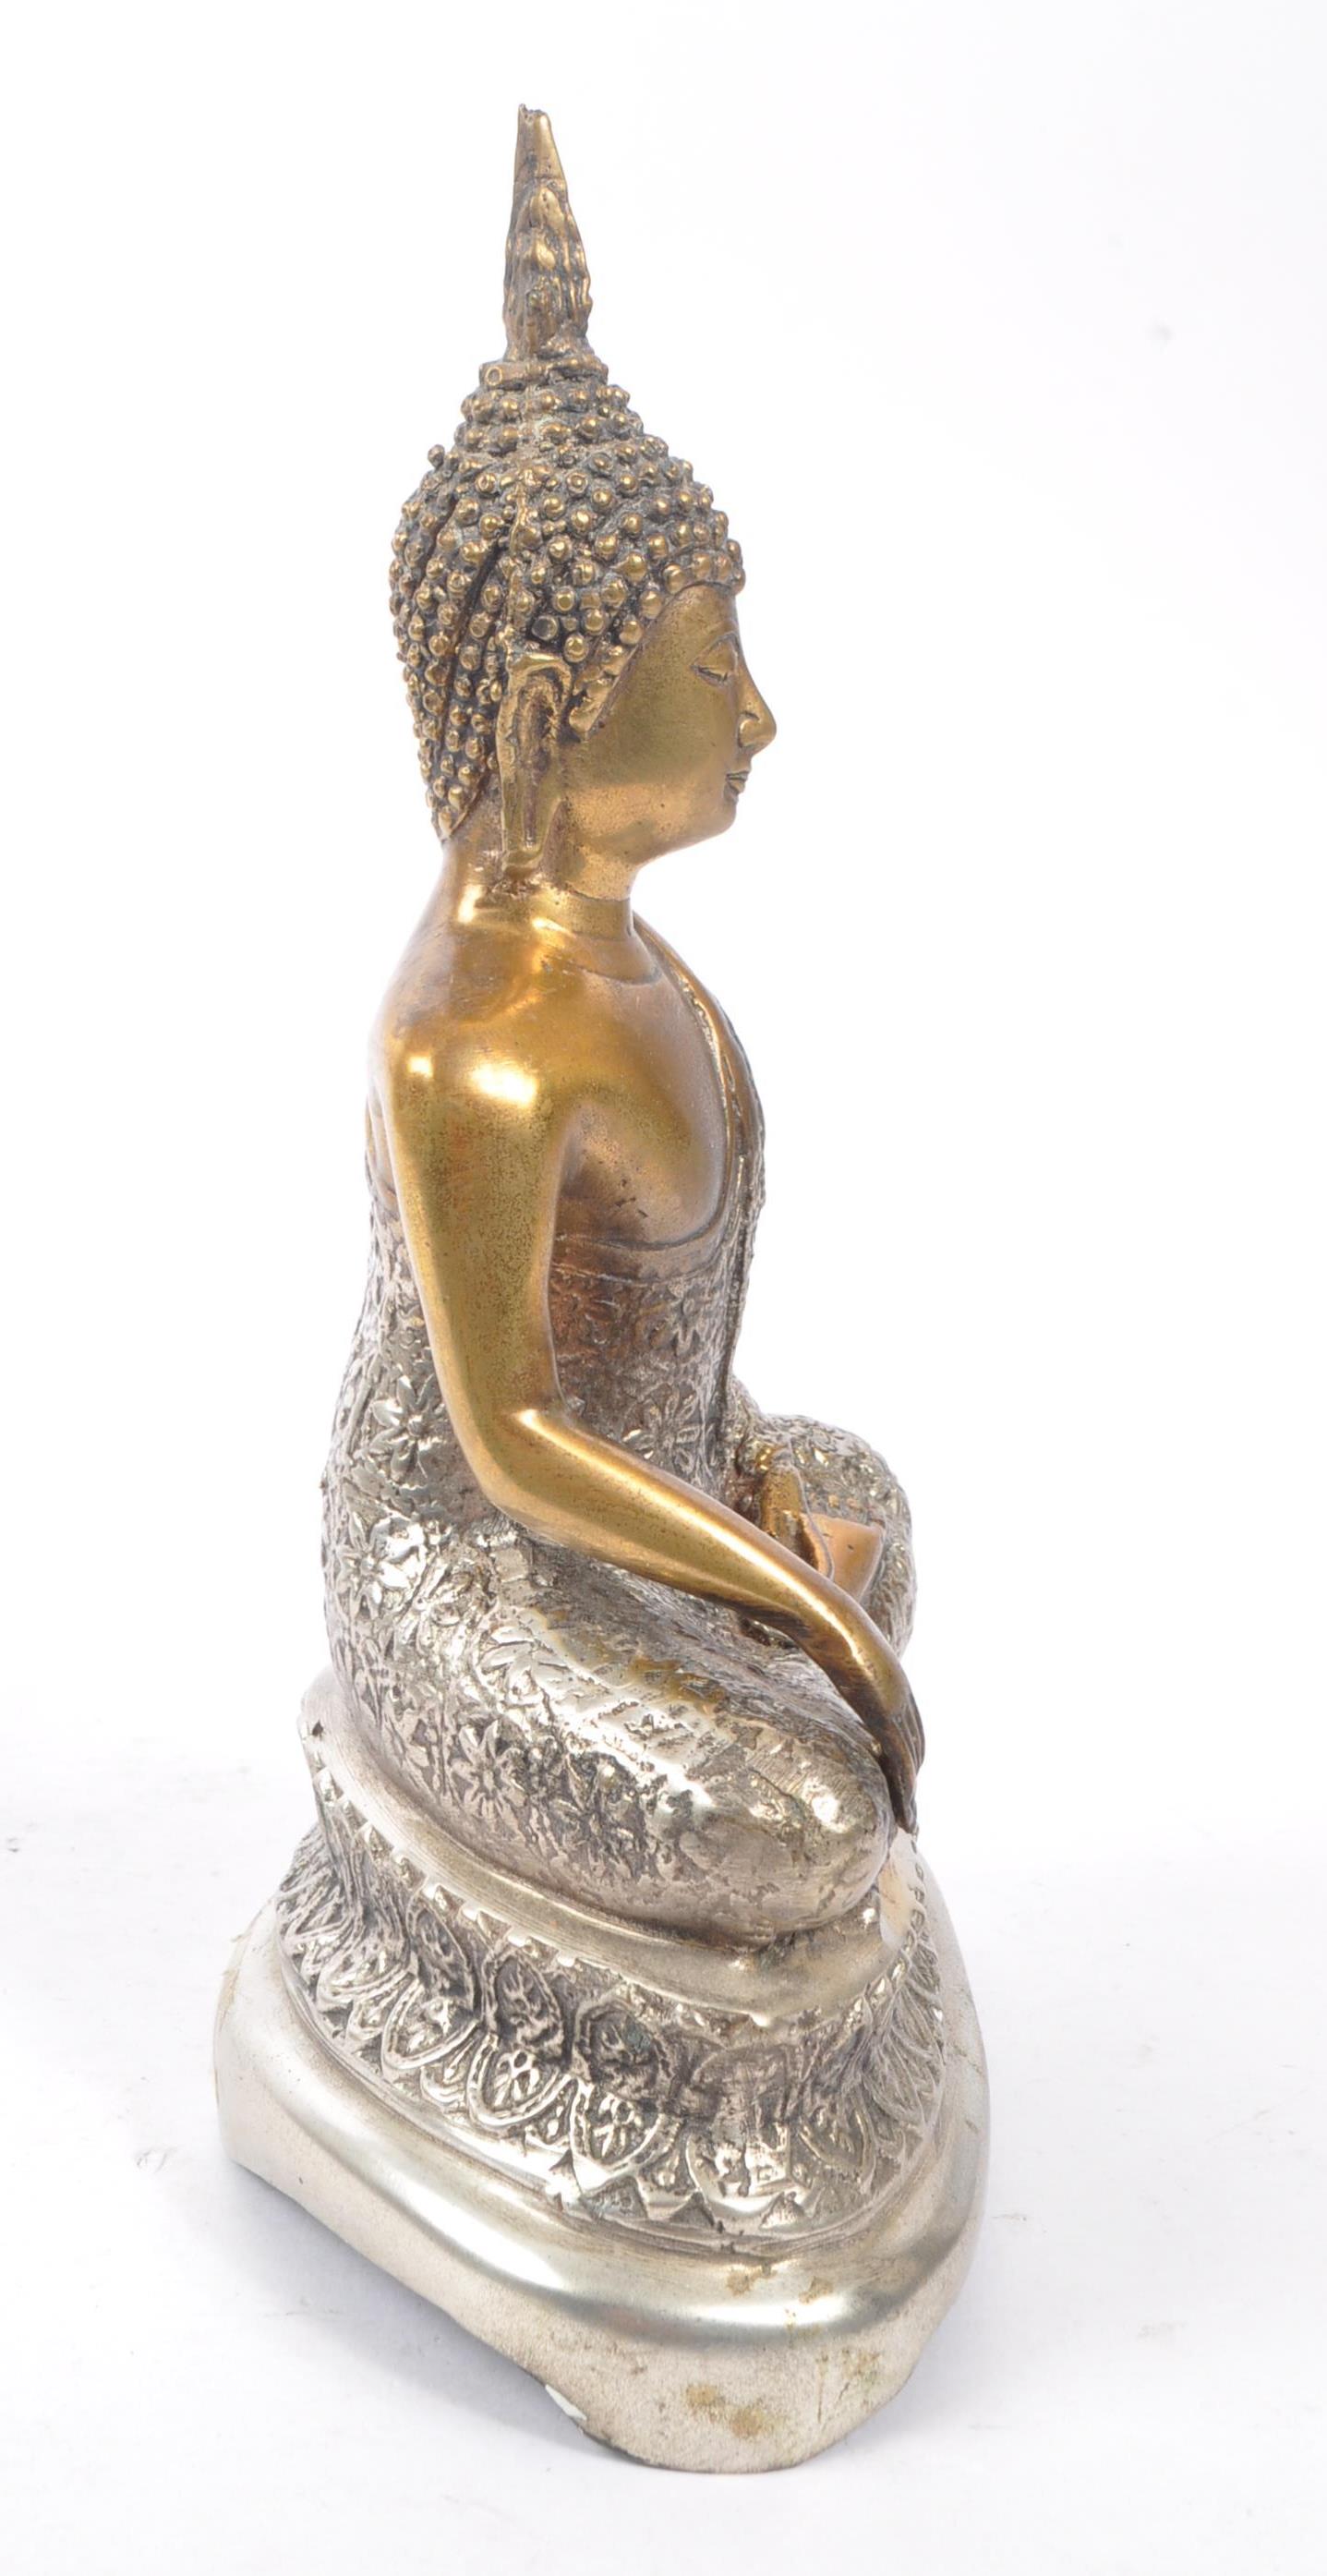 PAINTED GOLD AND SILVER BRONZE BUDDHA FIGURE - Image 2 of 7